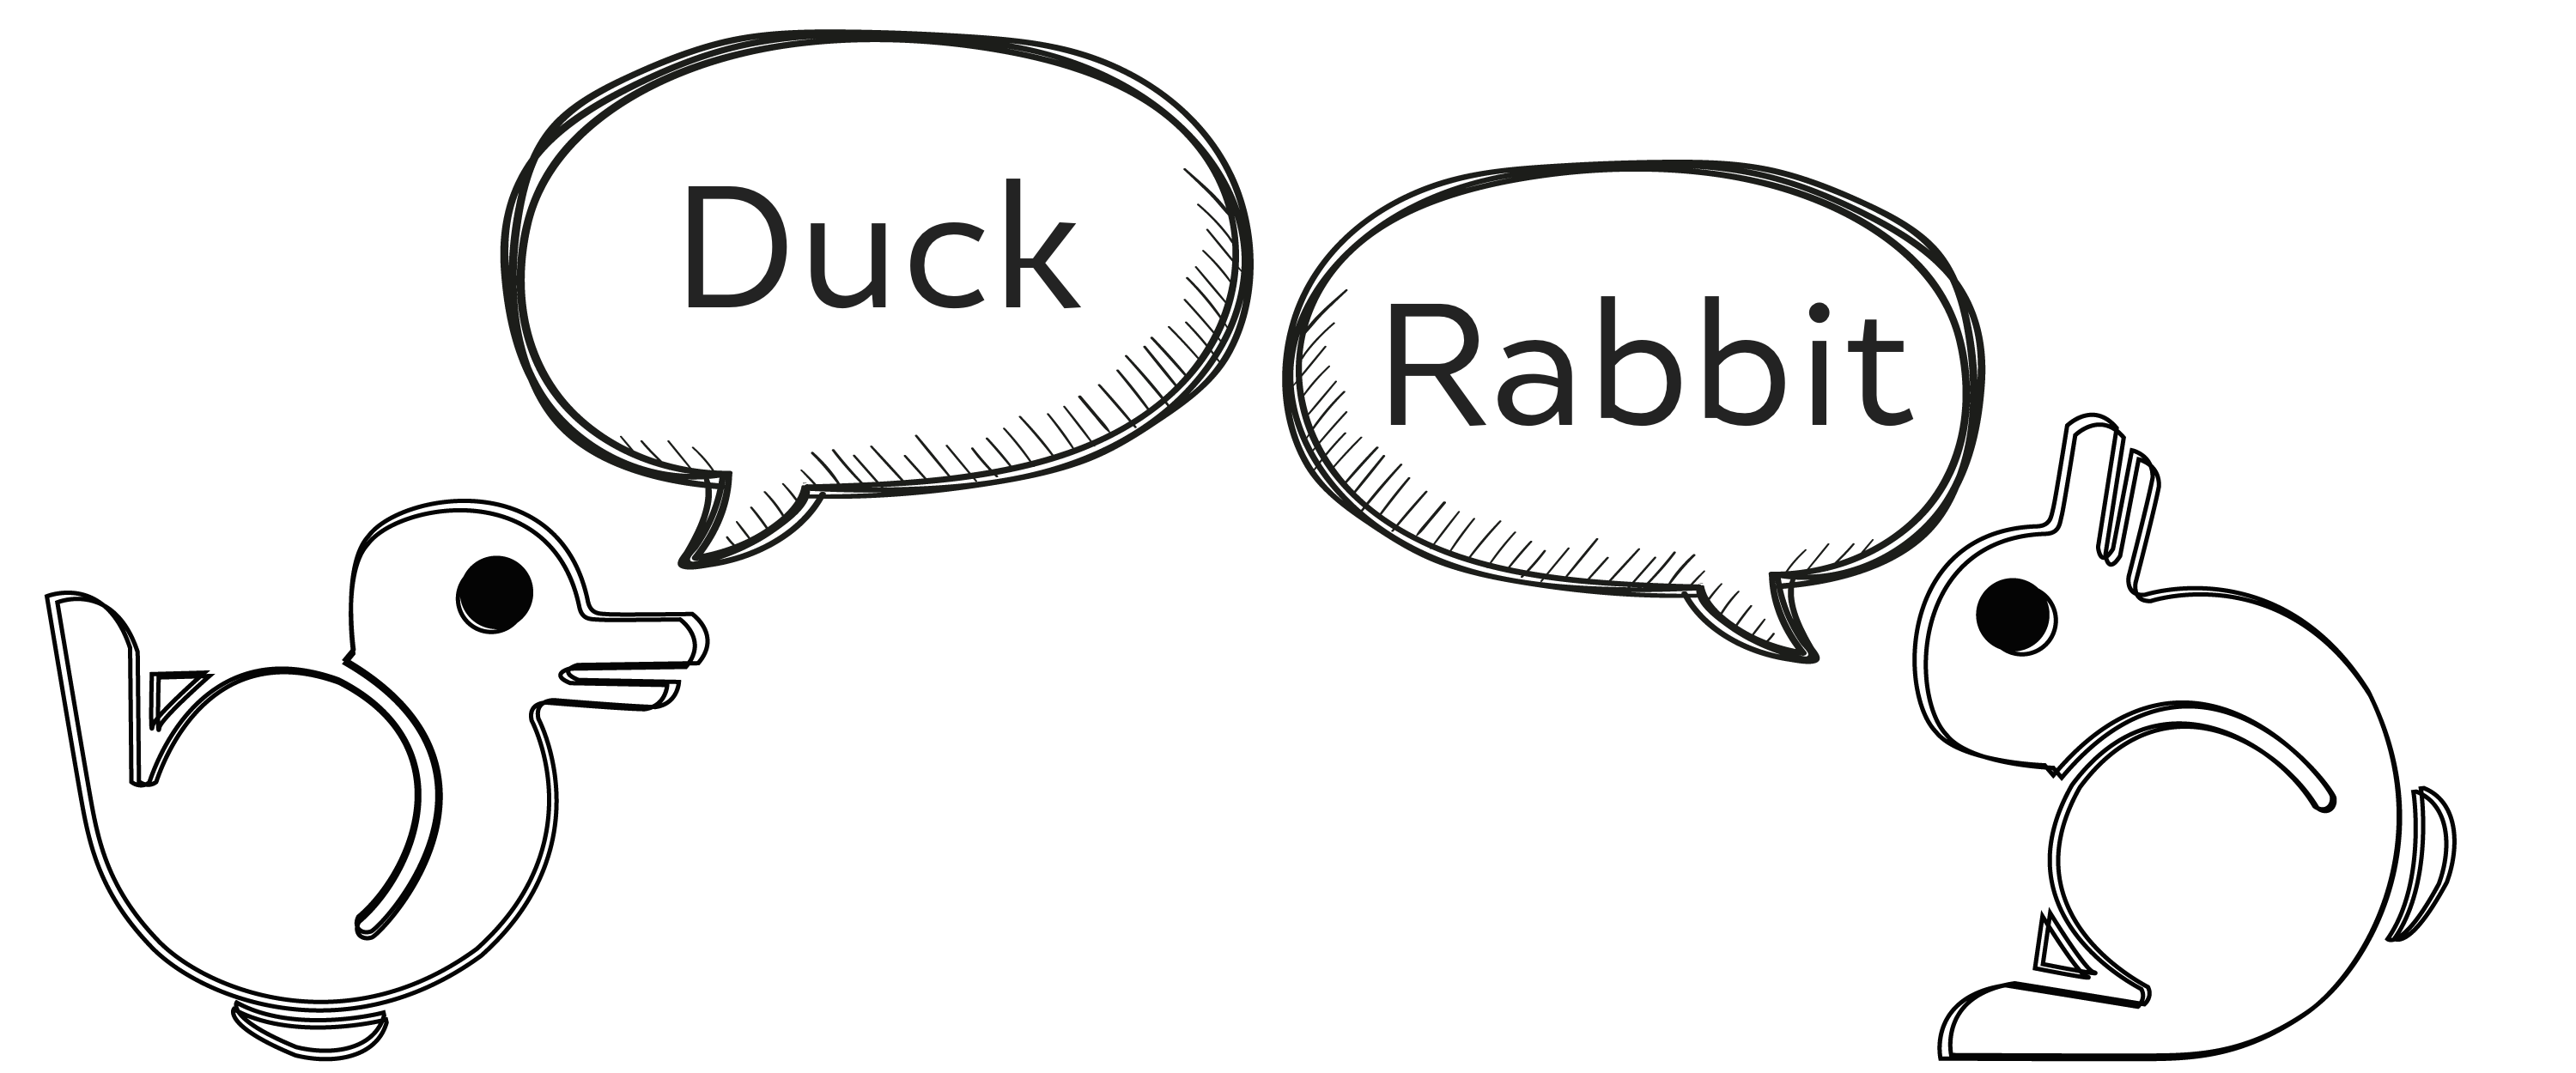 A pair of a duck and rabbit, each drawn with the exact same shape, only rotated 90 degrees